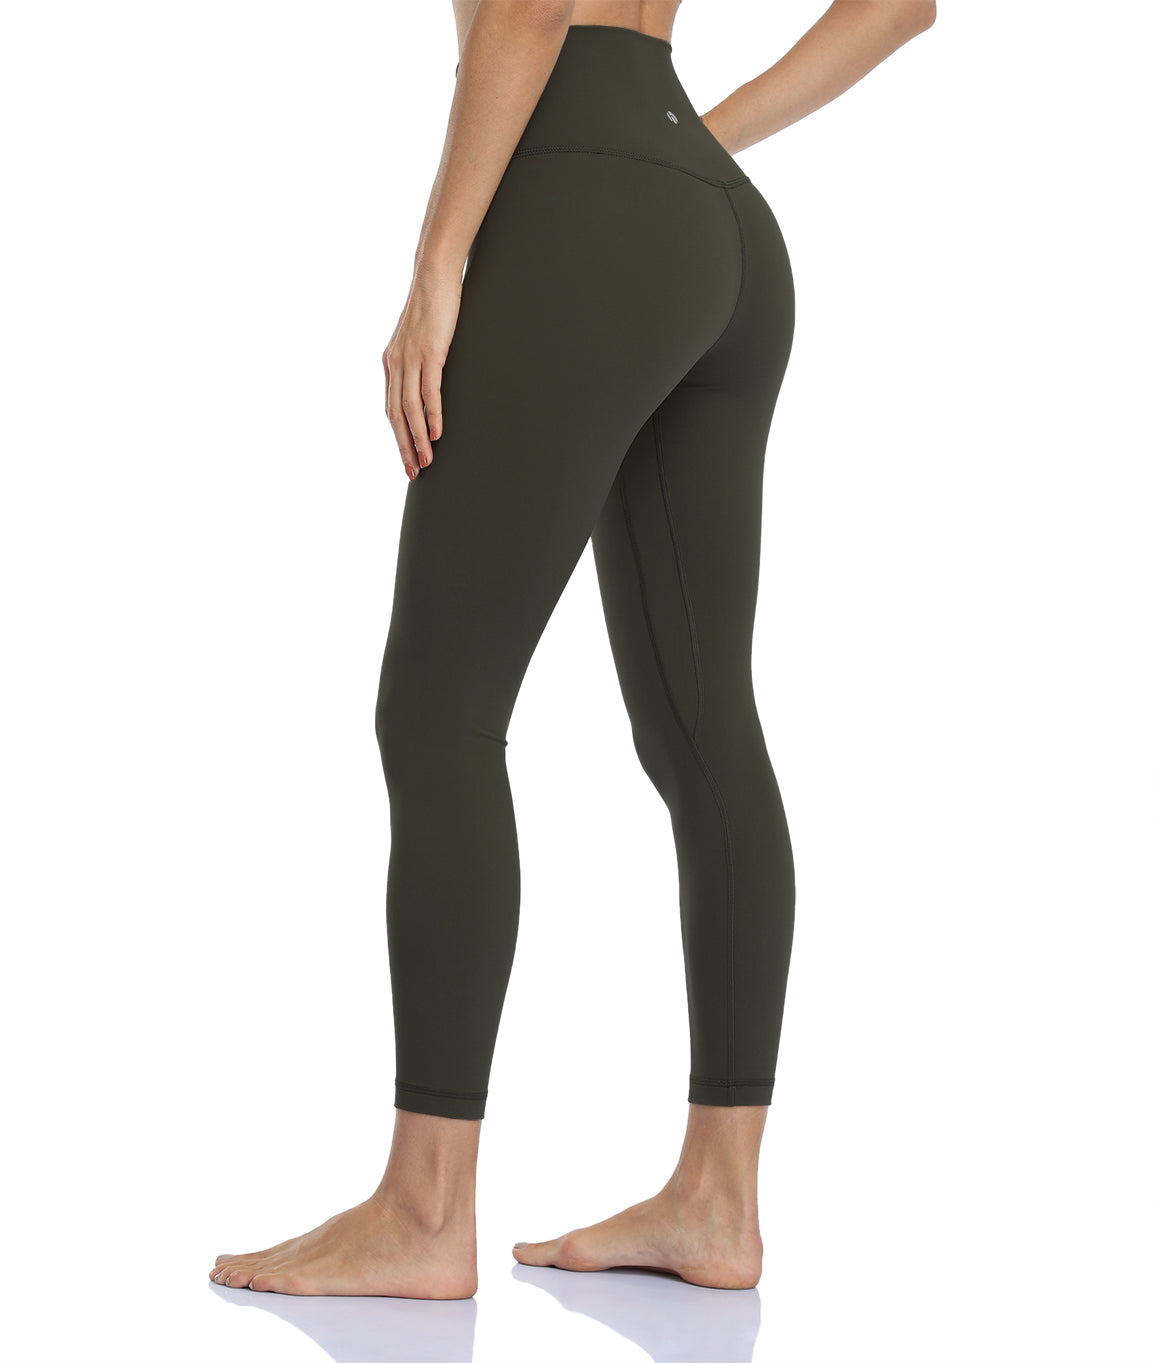 HeyNuts Essential 7/8 Leggings with Side Pockets for Women, High